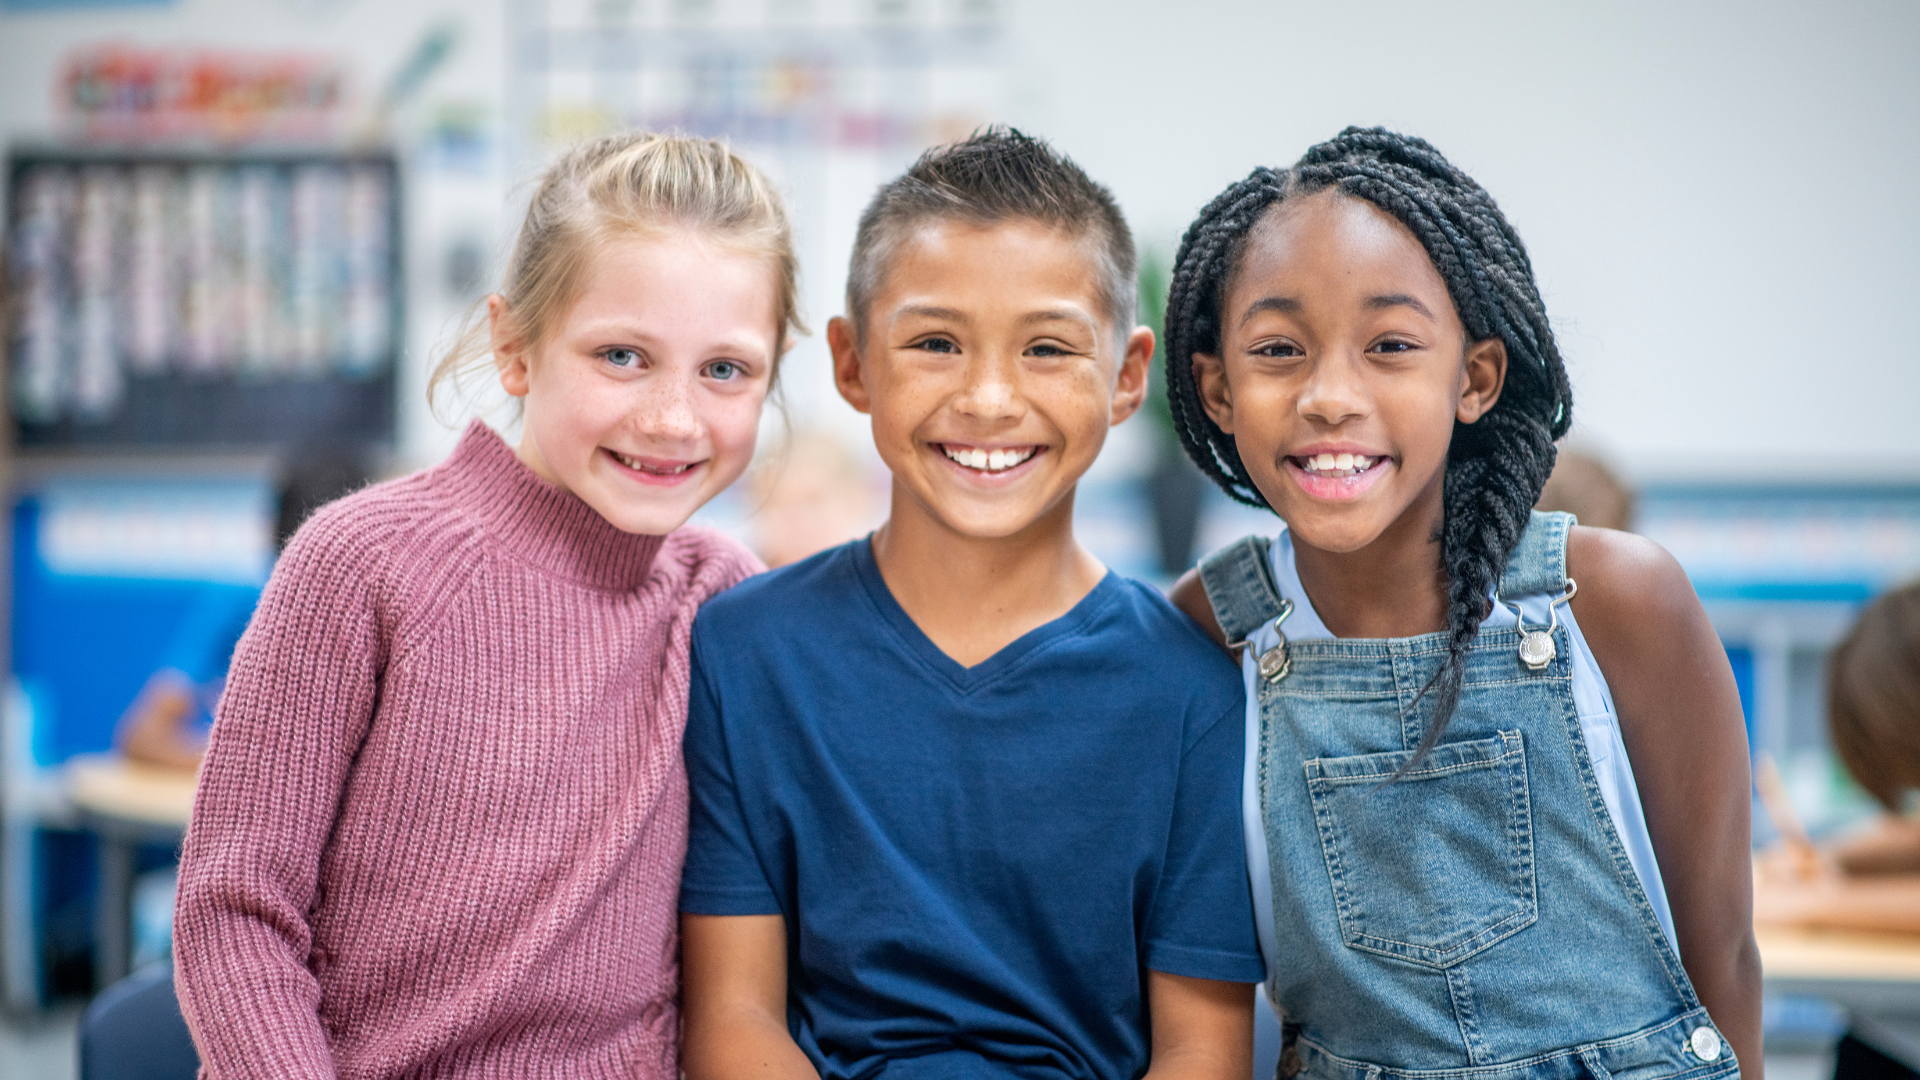 Diverse k-12 students pose for a picture while in their classroom